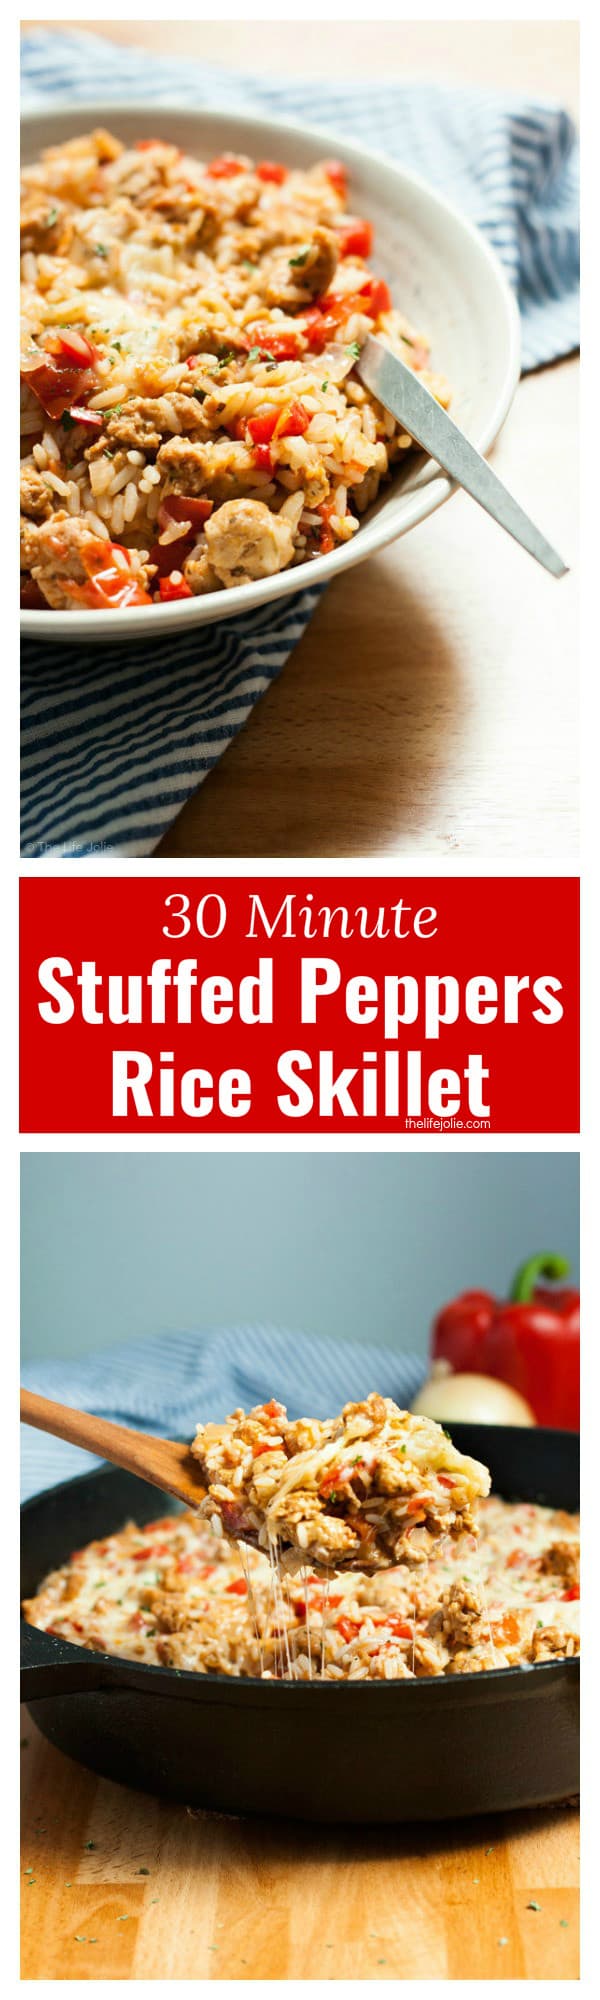 This 30 Minute Stuffed Peppers Rice Skillet recipe is the perfect dinner for a busy weeknight. This easy dinner comes together in just 30 minutes and you can use Turkey Sausage to make it a healthy option. It's cheesy, delicious and full of flavor- perfect for busy nights when the kids are back-to-school! Click on the photo to get the recipe!